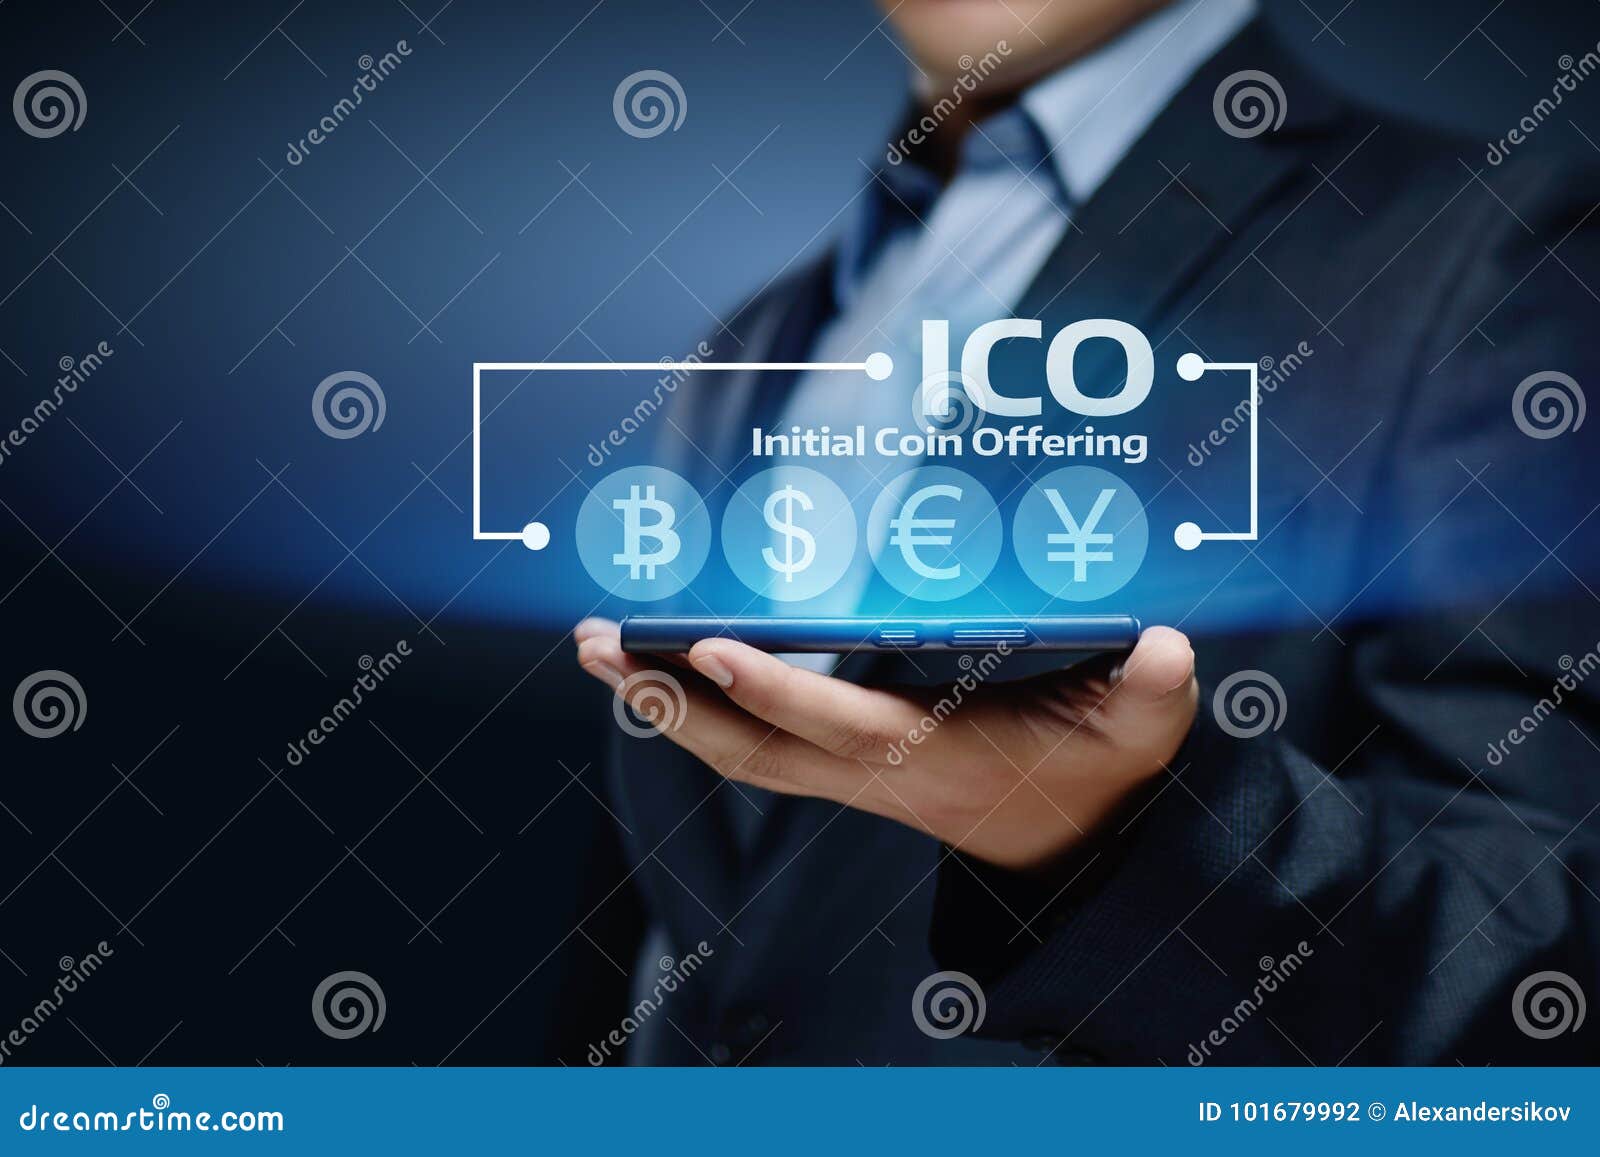 ico initial coin offering business internet technology concept